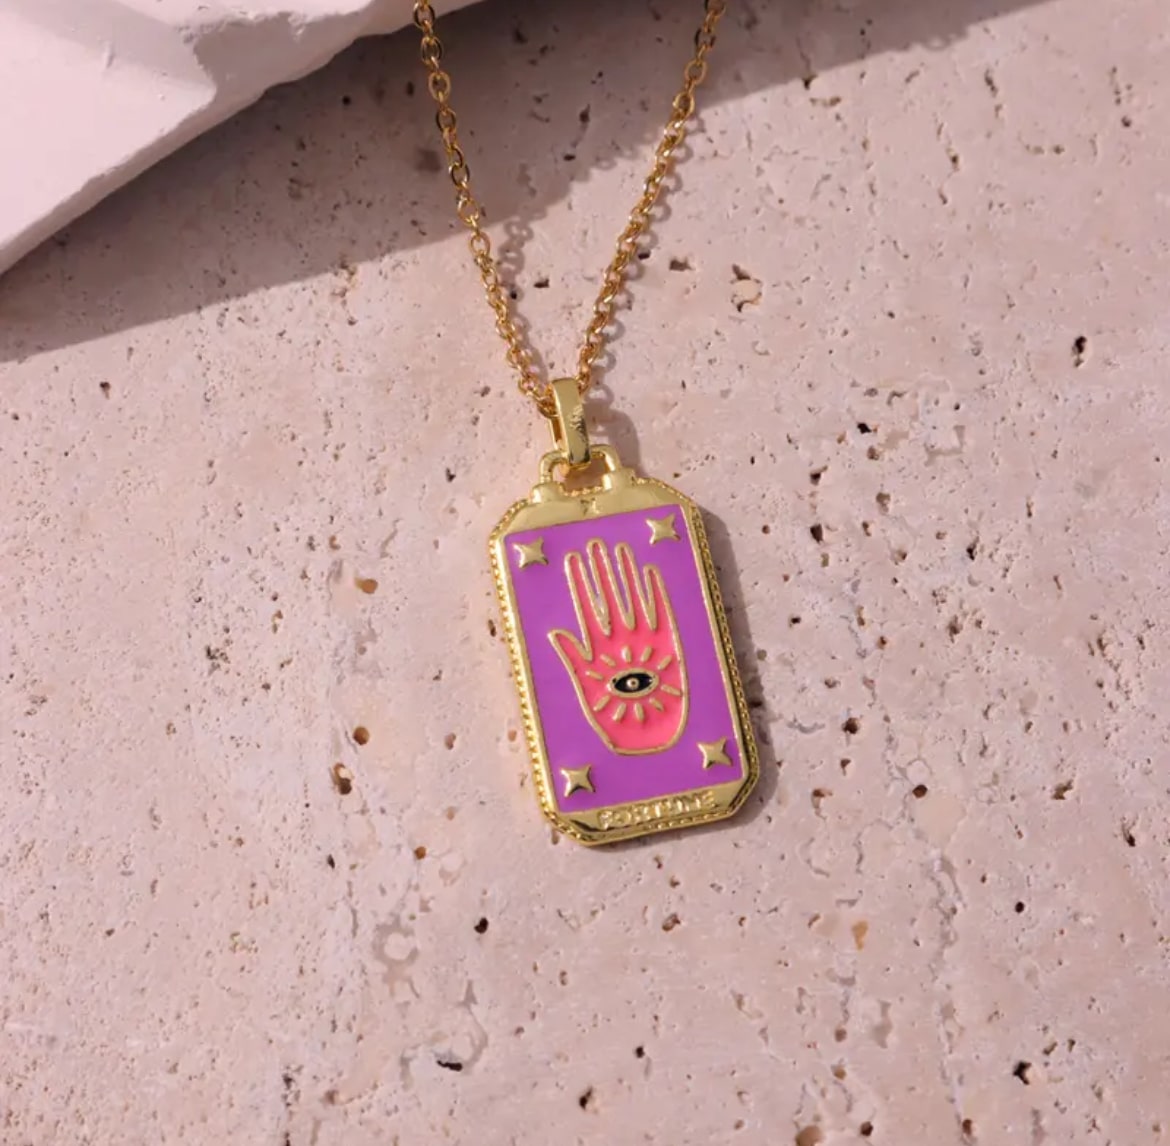 Pink tarot card necklace, a unique and meaningful accessory for any occasion.